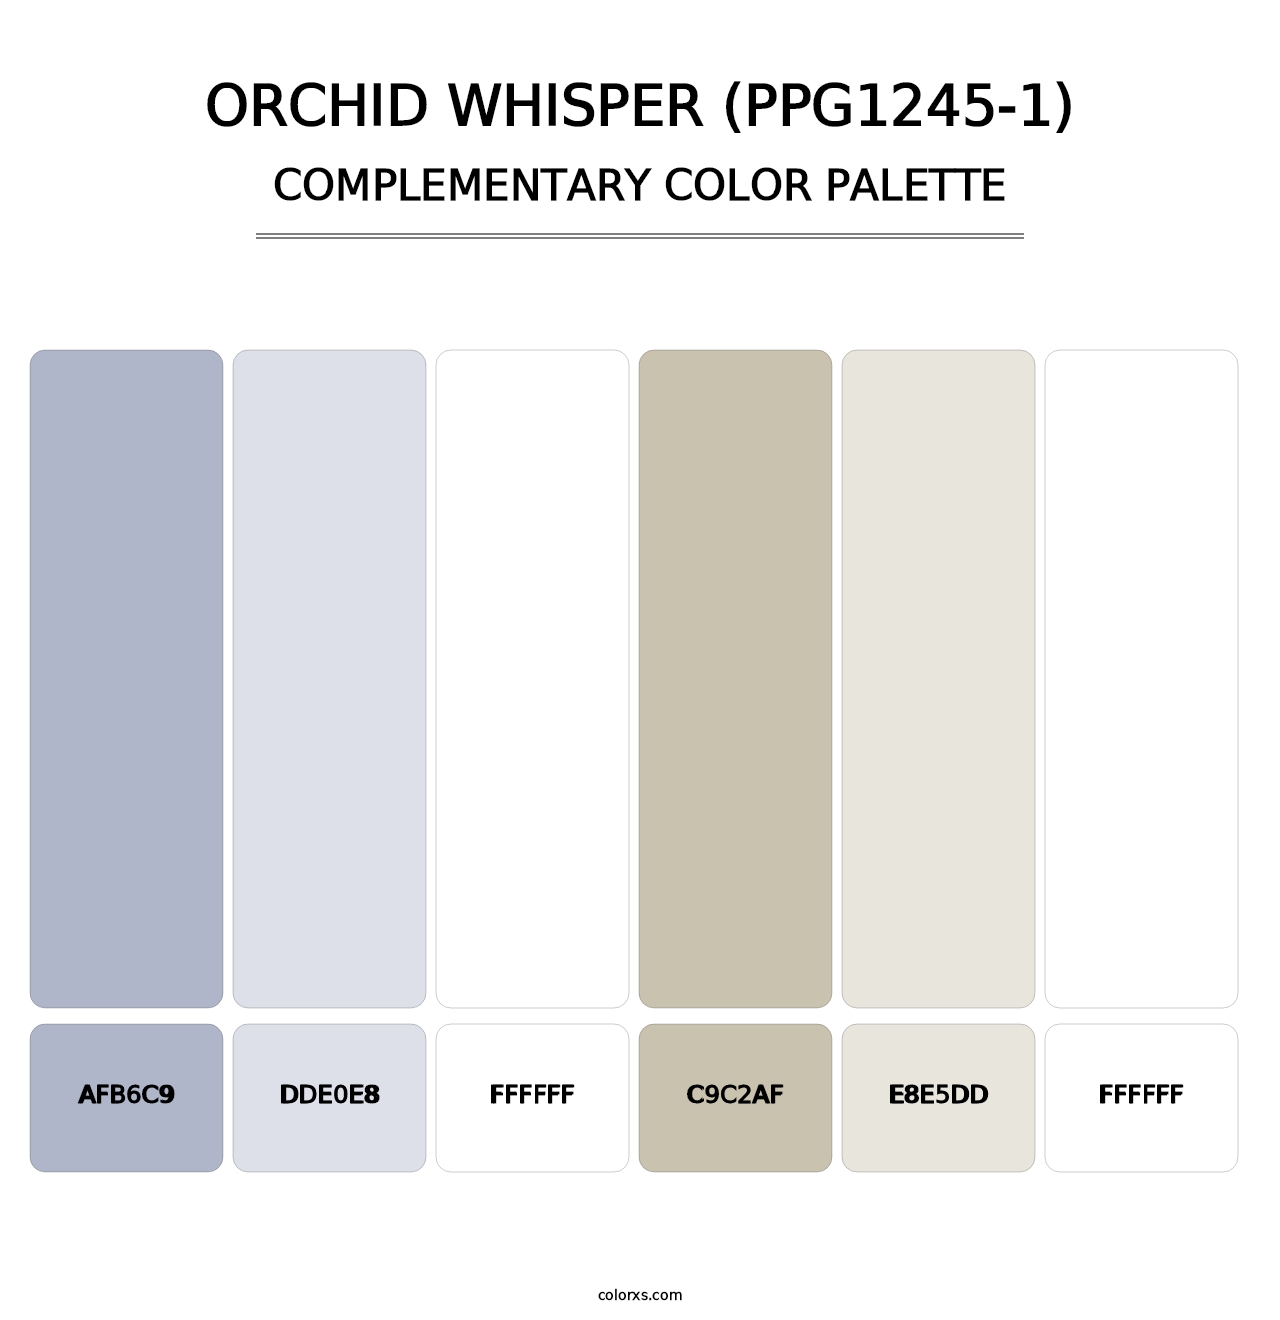 Orchid Whisper (PPG1245-1) - Complementary Color Palette